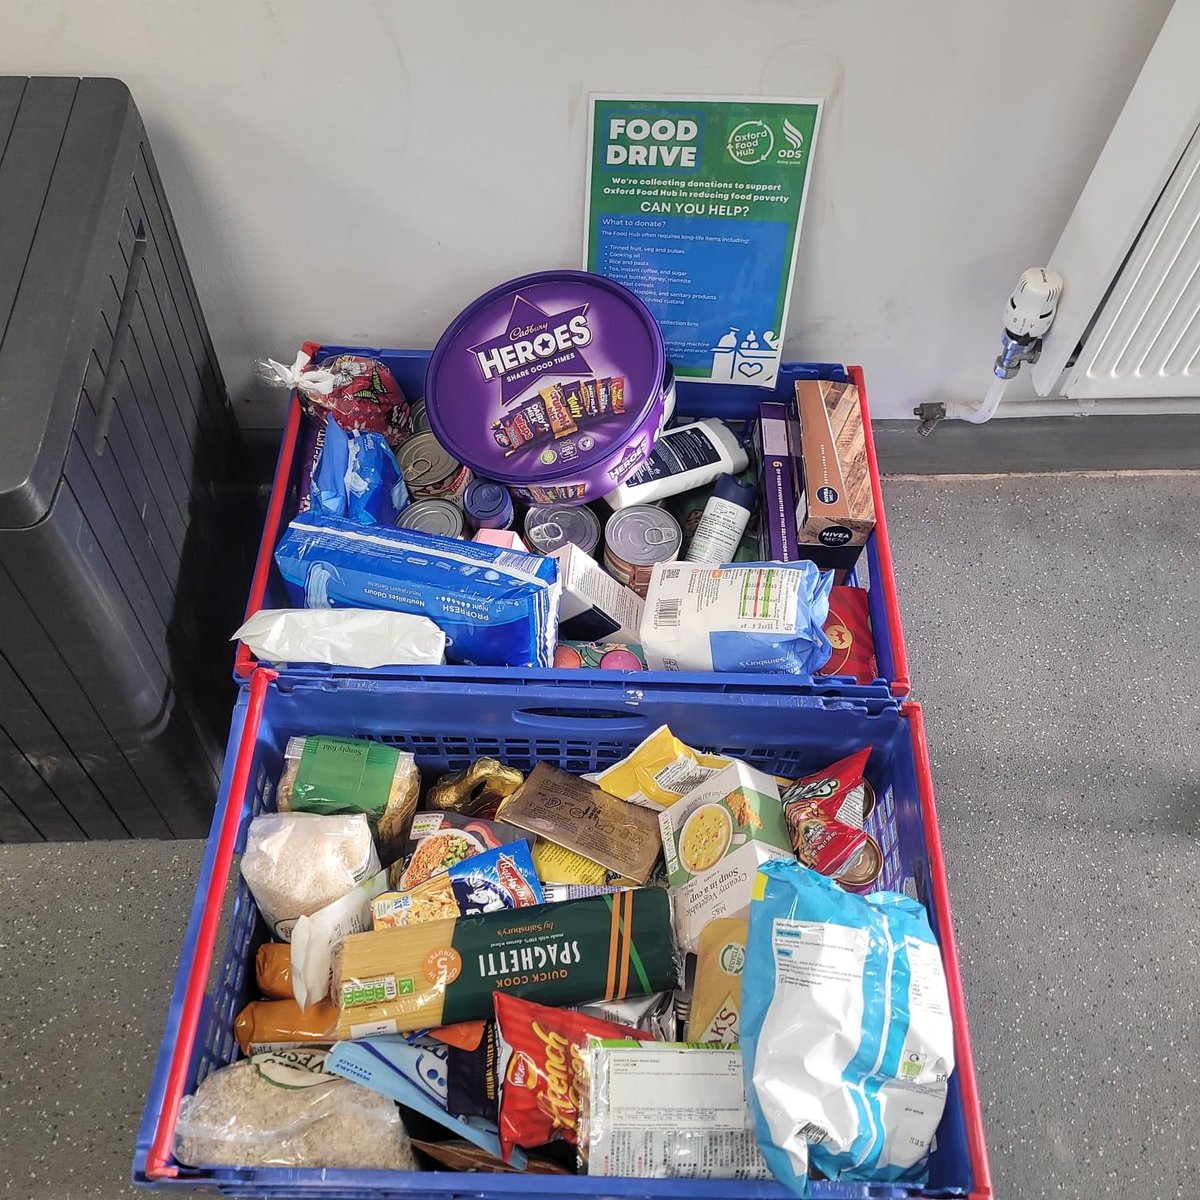 Our team collected 72 items for @oxfordfoodhub! 🥦 At ODS, we're all about making a positive impact. Supporting @OxfordFoodHub's mission to reduce food waste and combat food poverty in Oxfordshire, our staff exceeded last year's efforts! 🎉 A big thanks to our fantastic team💚